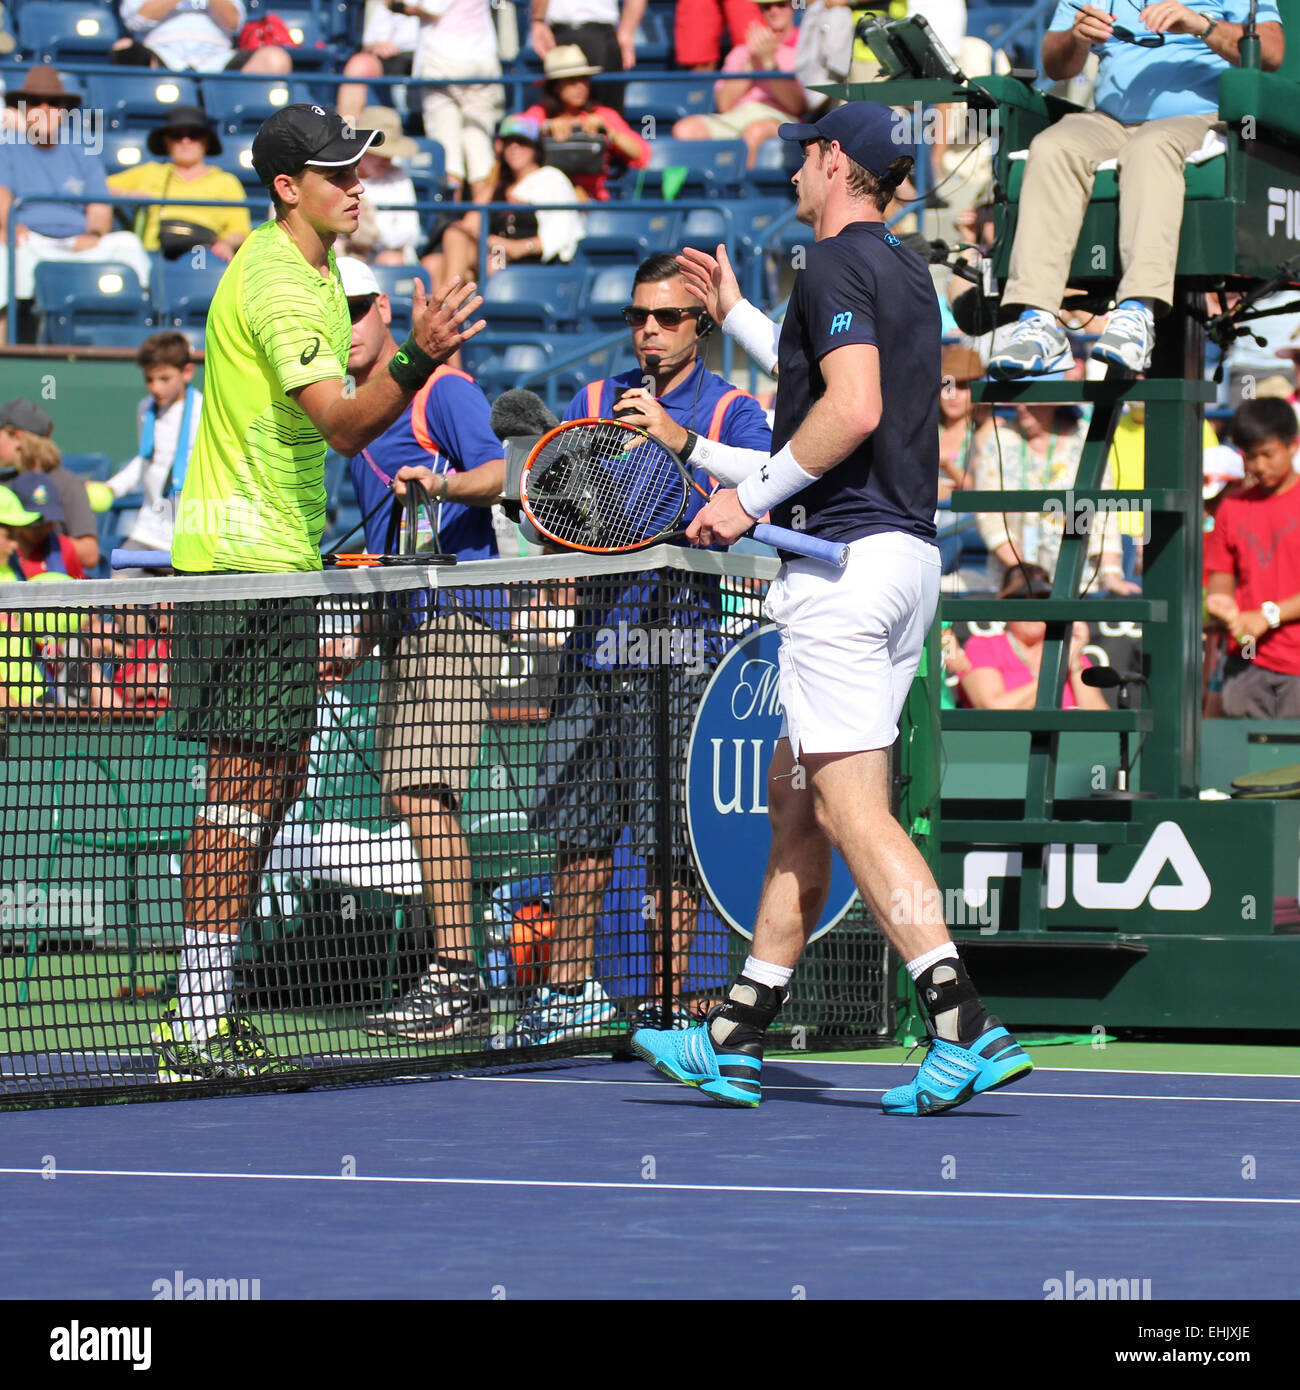 Indian Wells, California 14th March, 2015 British tennis player Andy Murray defeats Vasek Pospisil of Canada in the Mens Singles 2nd Round (score 6-1 6-3)